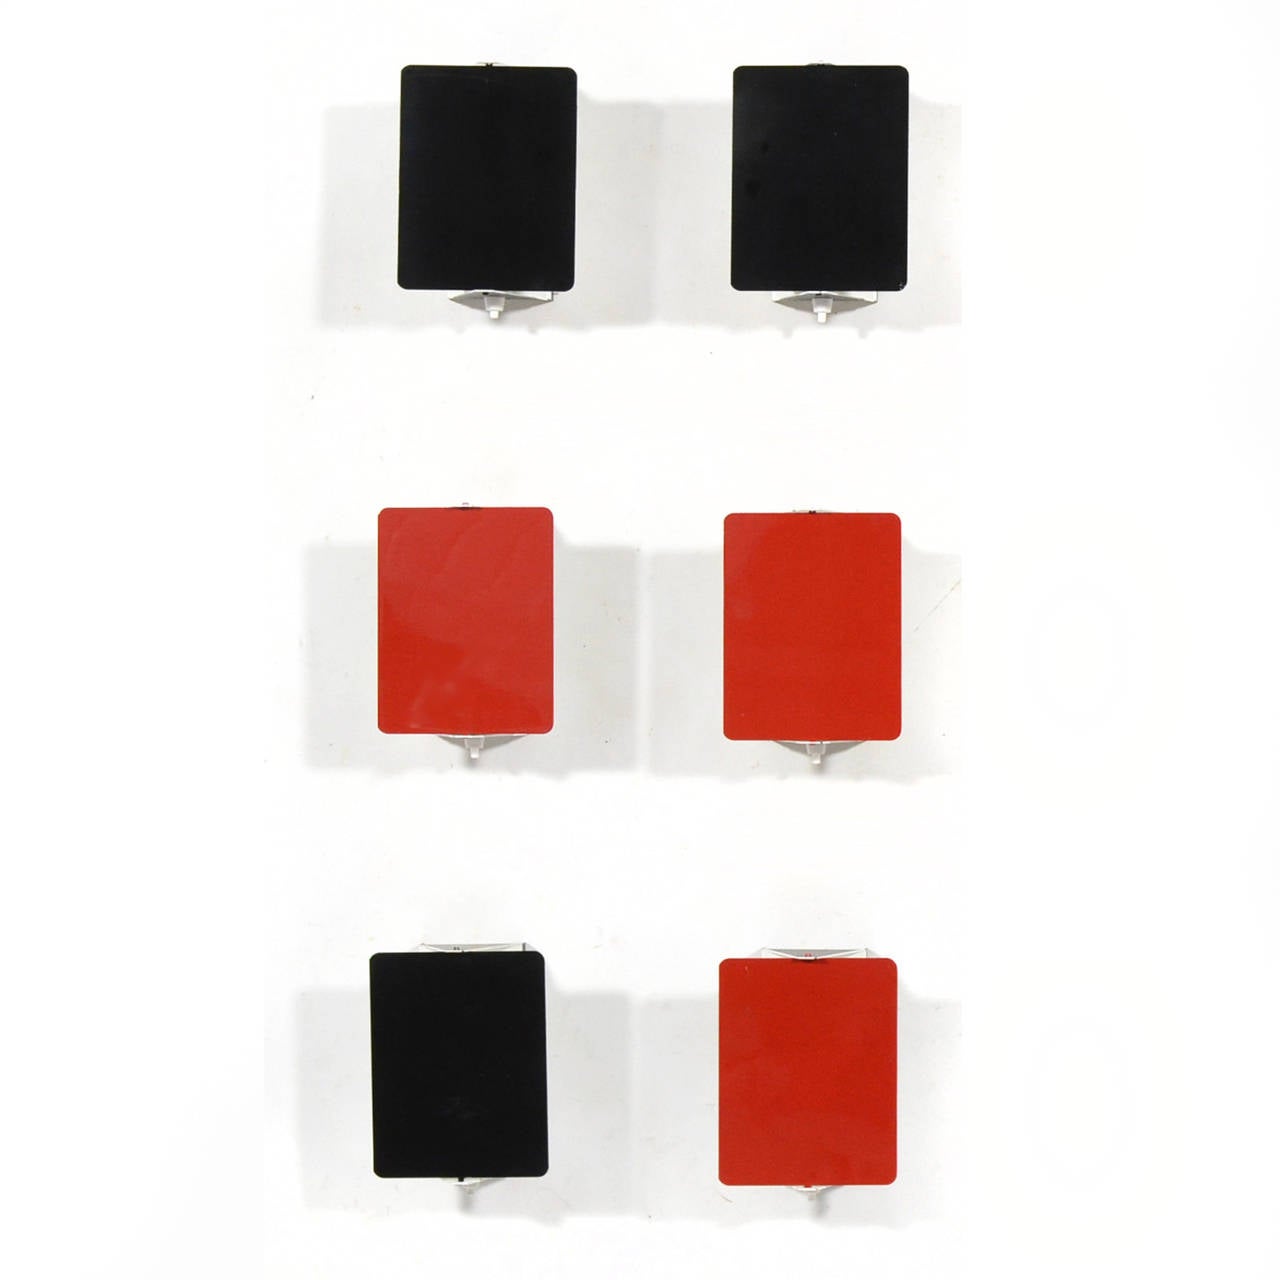 This set of six Perriand wall sconces features three red lamps and three black. A brilliant minimal design by Perriand, the pivoting shade shields glare and directs the light. The lamps may be used vertically or horizontally and can be arranged in